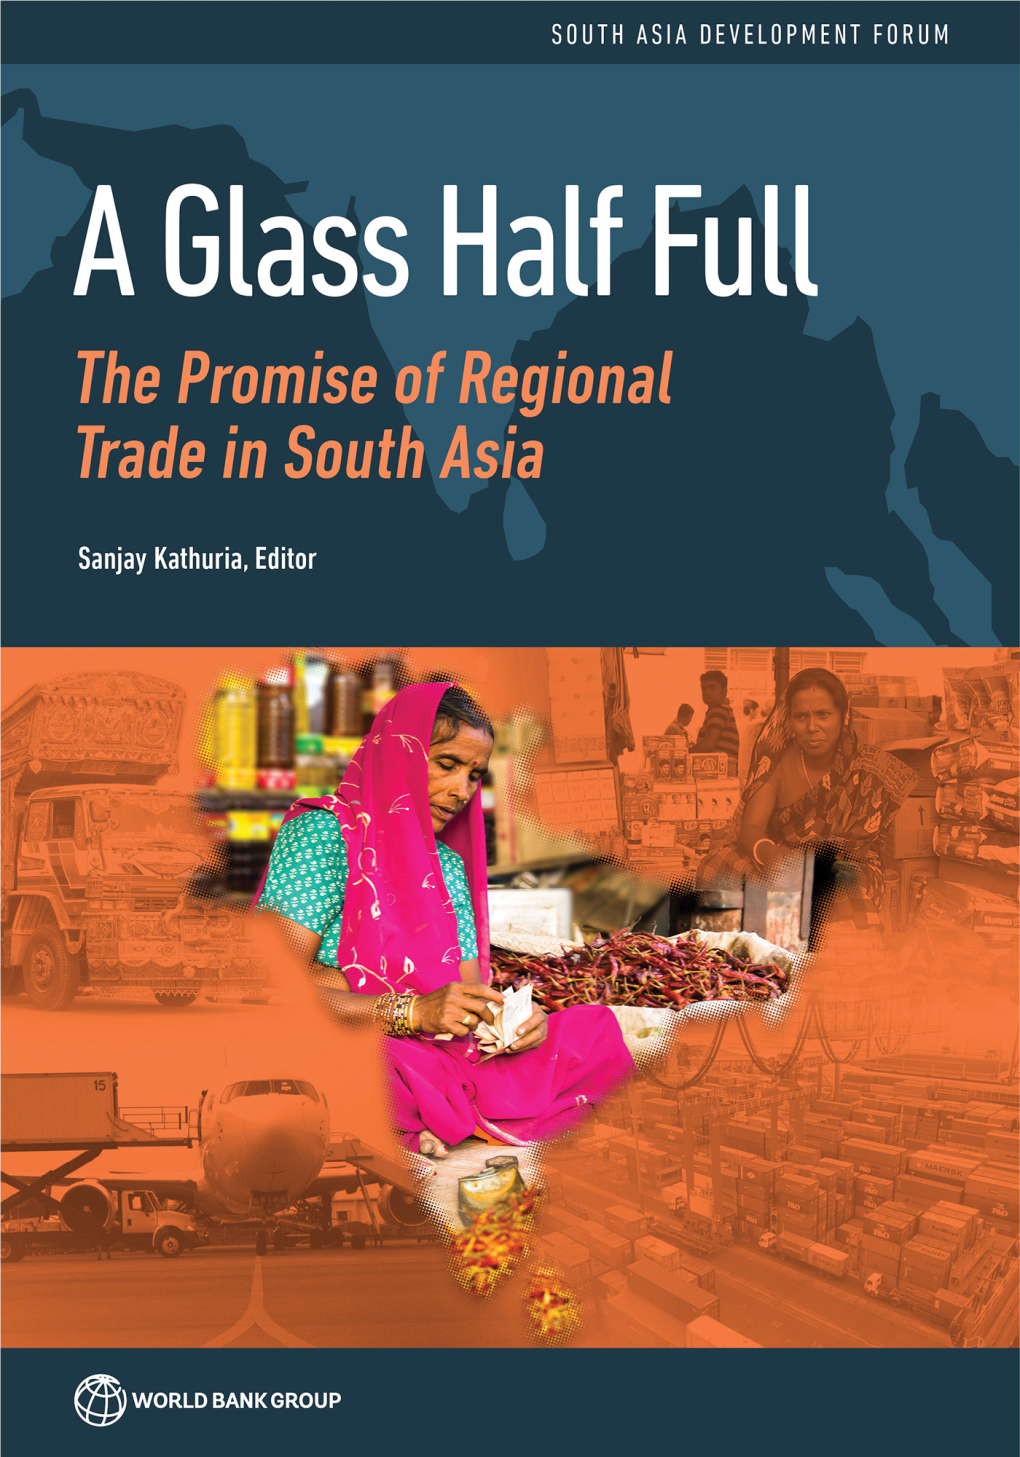 The Promise of Regional Trade in South Asia